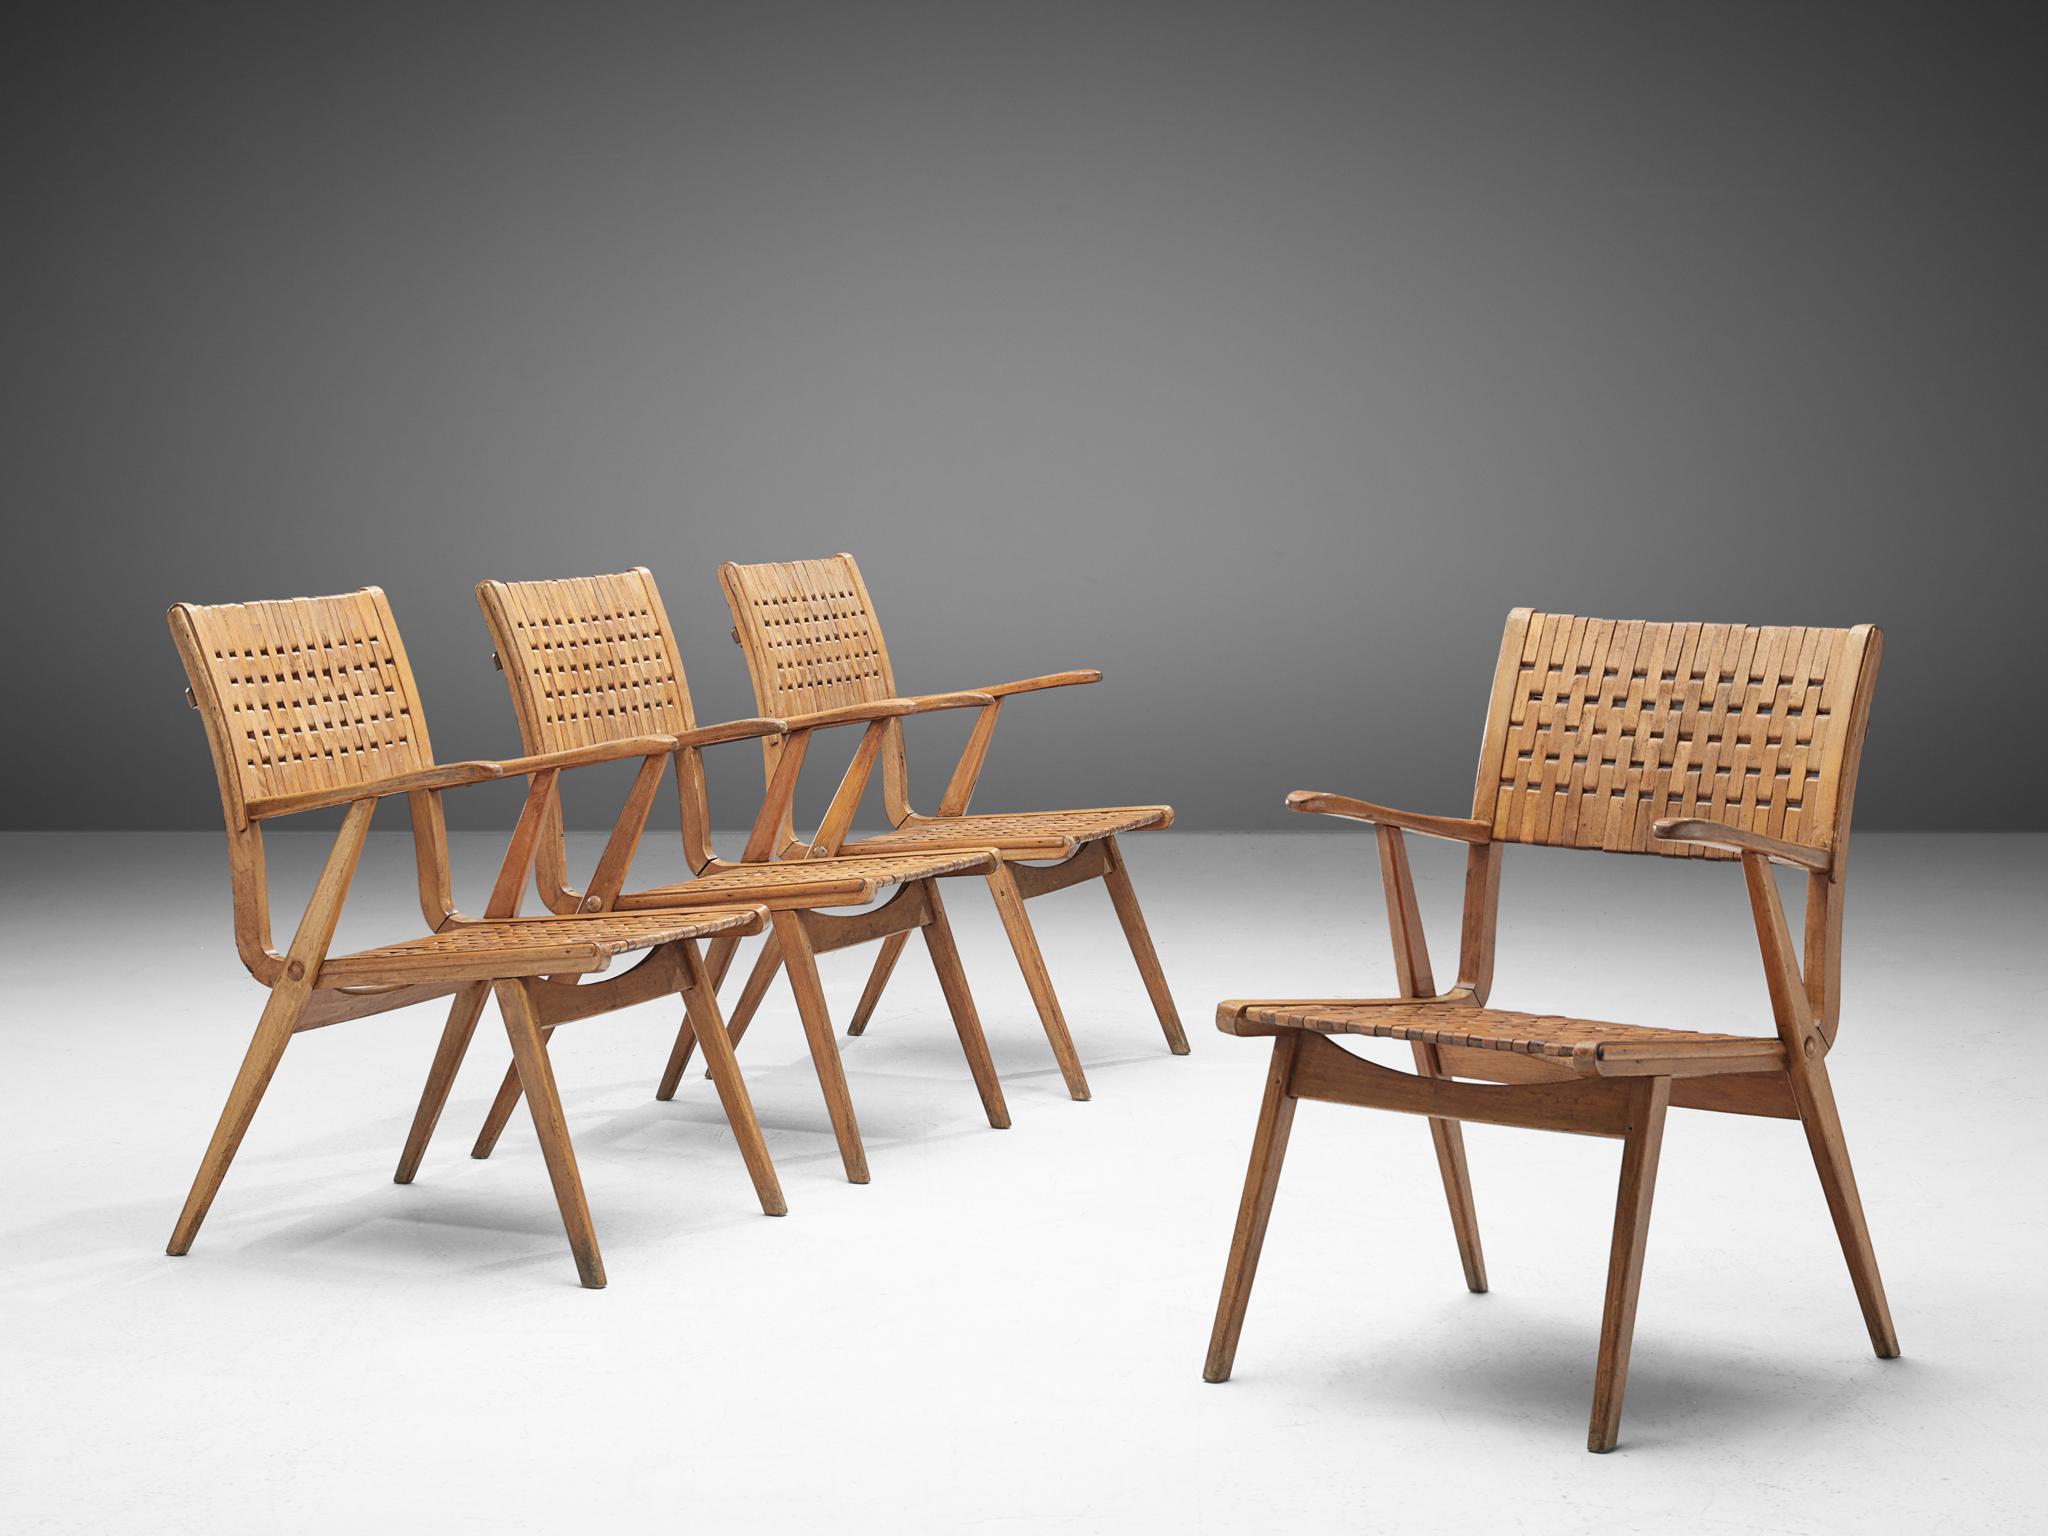 Erich Dieckmann, armchairs, plywood, webbing, Germany, 1930s.

This German set is executed with bent plywood and solid wooden seat with a webbed back. The style is typical for prewar German design. The chairs are modest yet refined by means of the